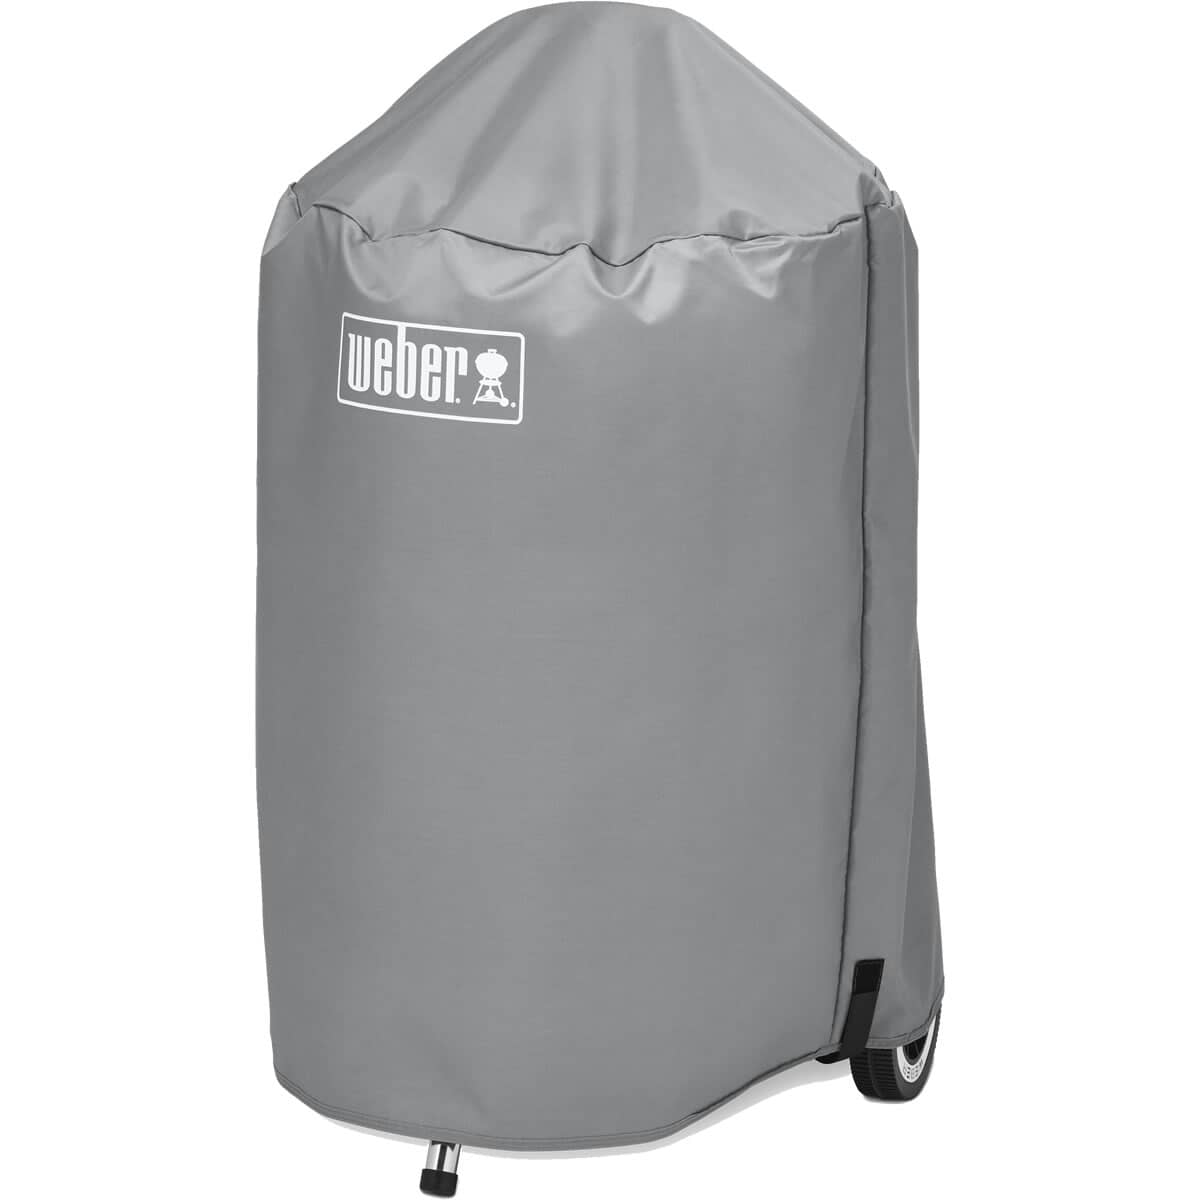 Weber BBQ Cover: Perfectly Suited For Your Weber Grills